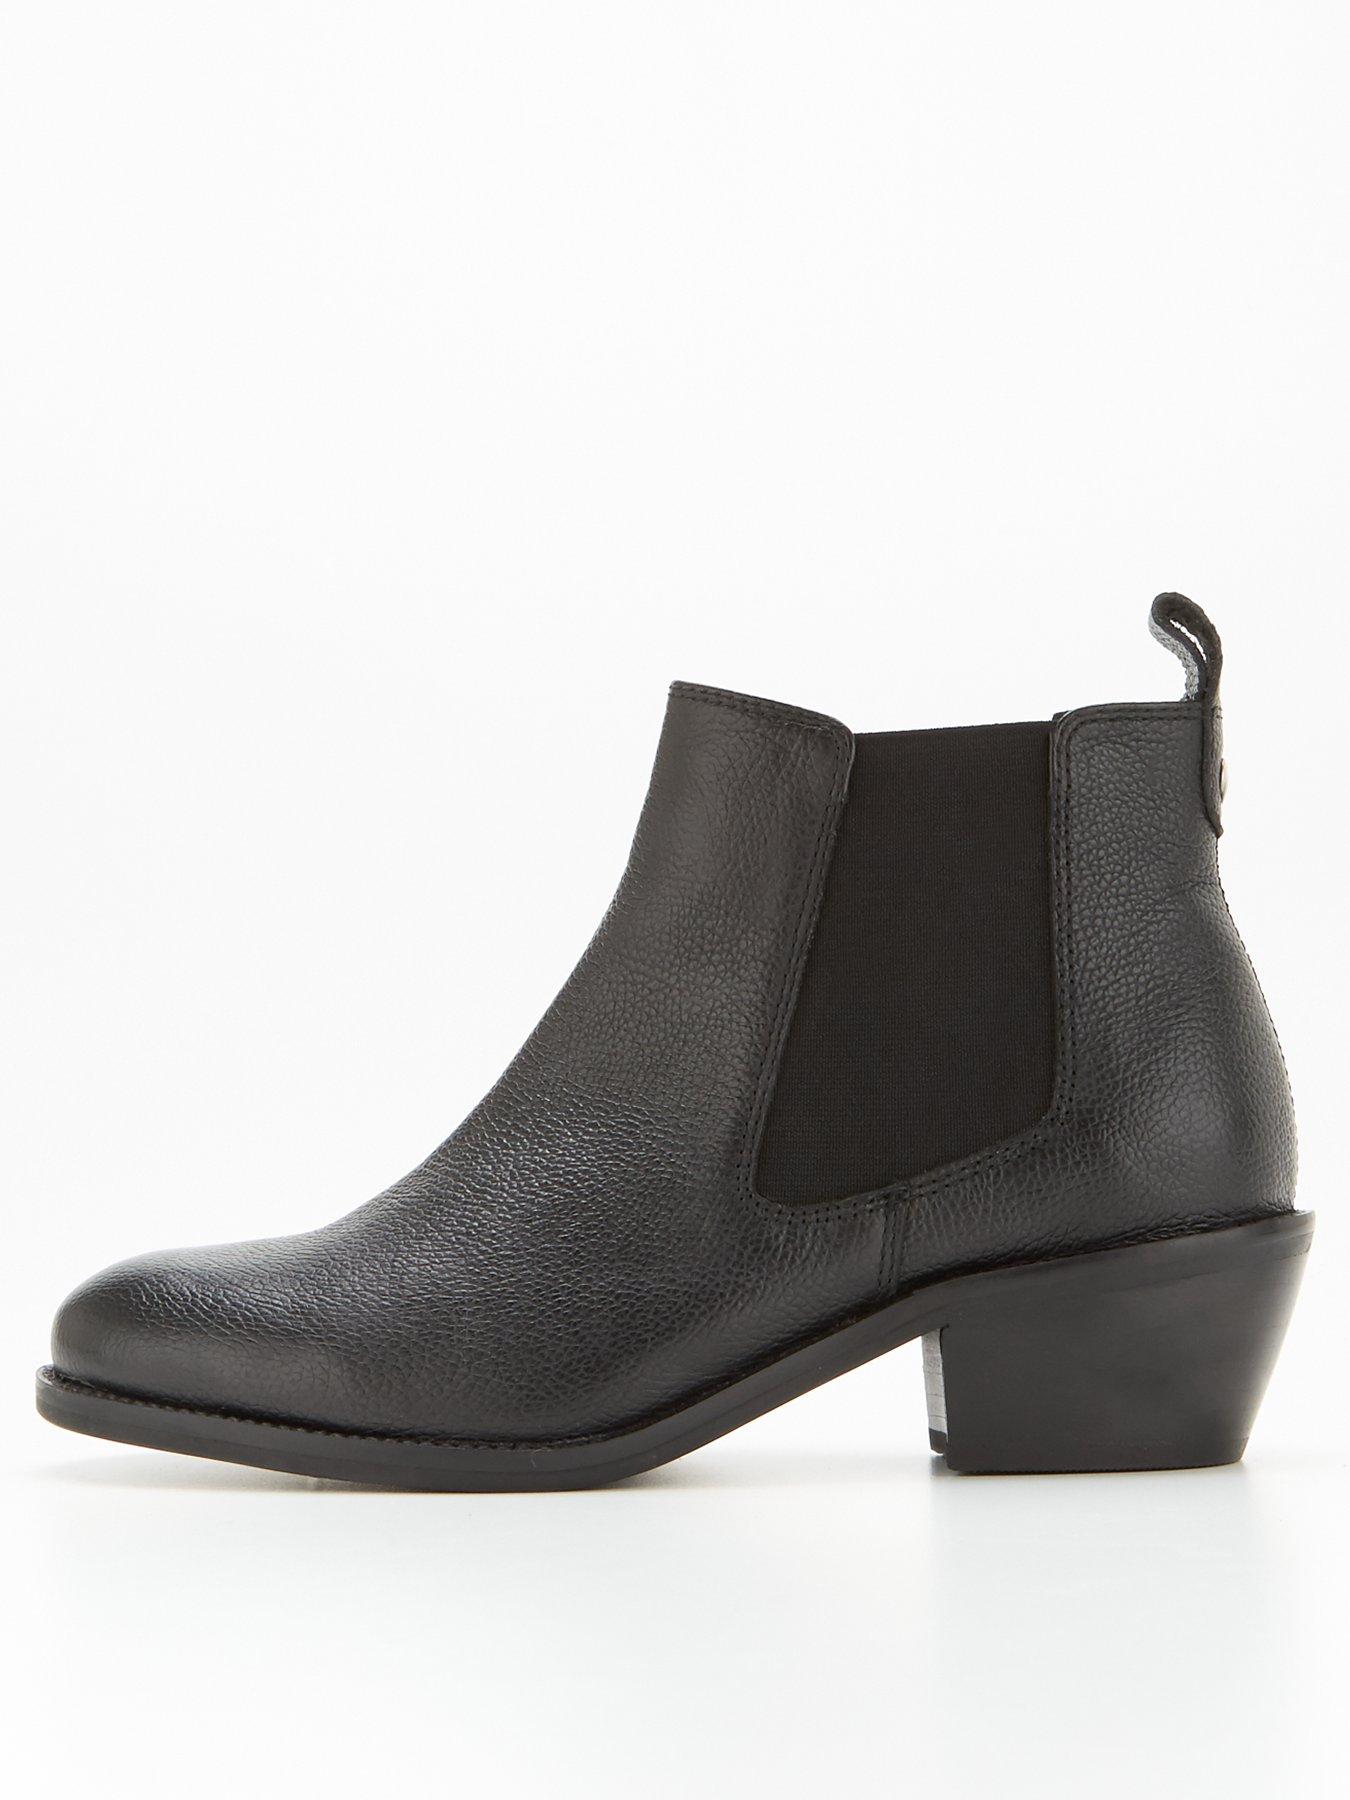  Wide Fit Leather Low Heel Ankle Boots  - Black